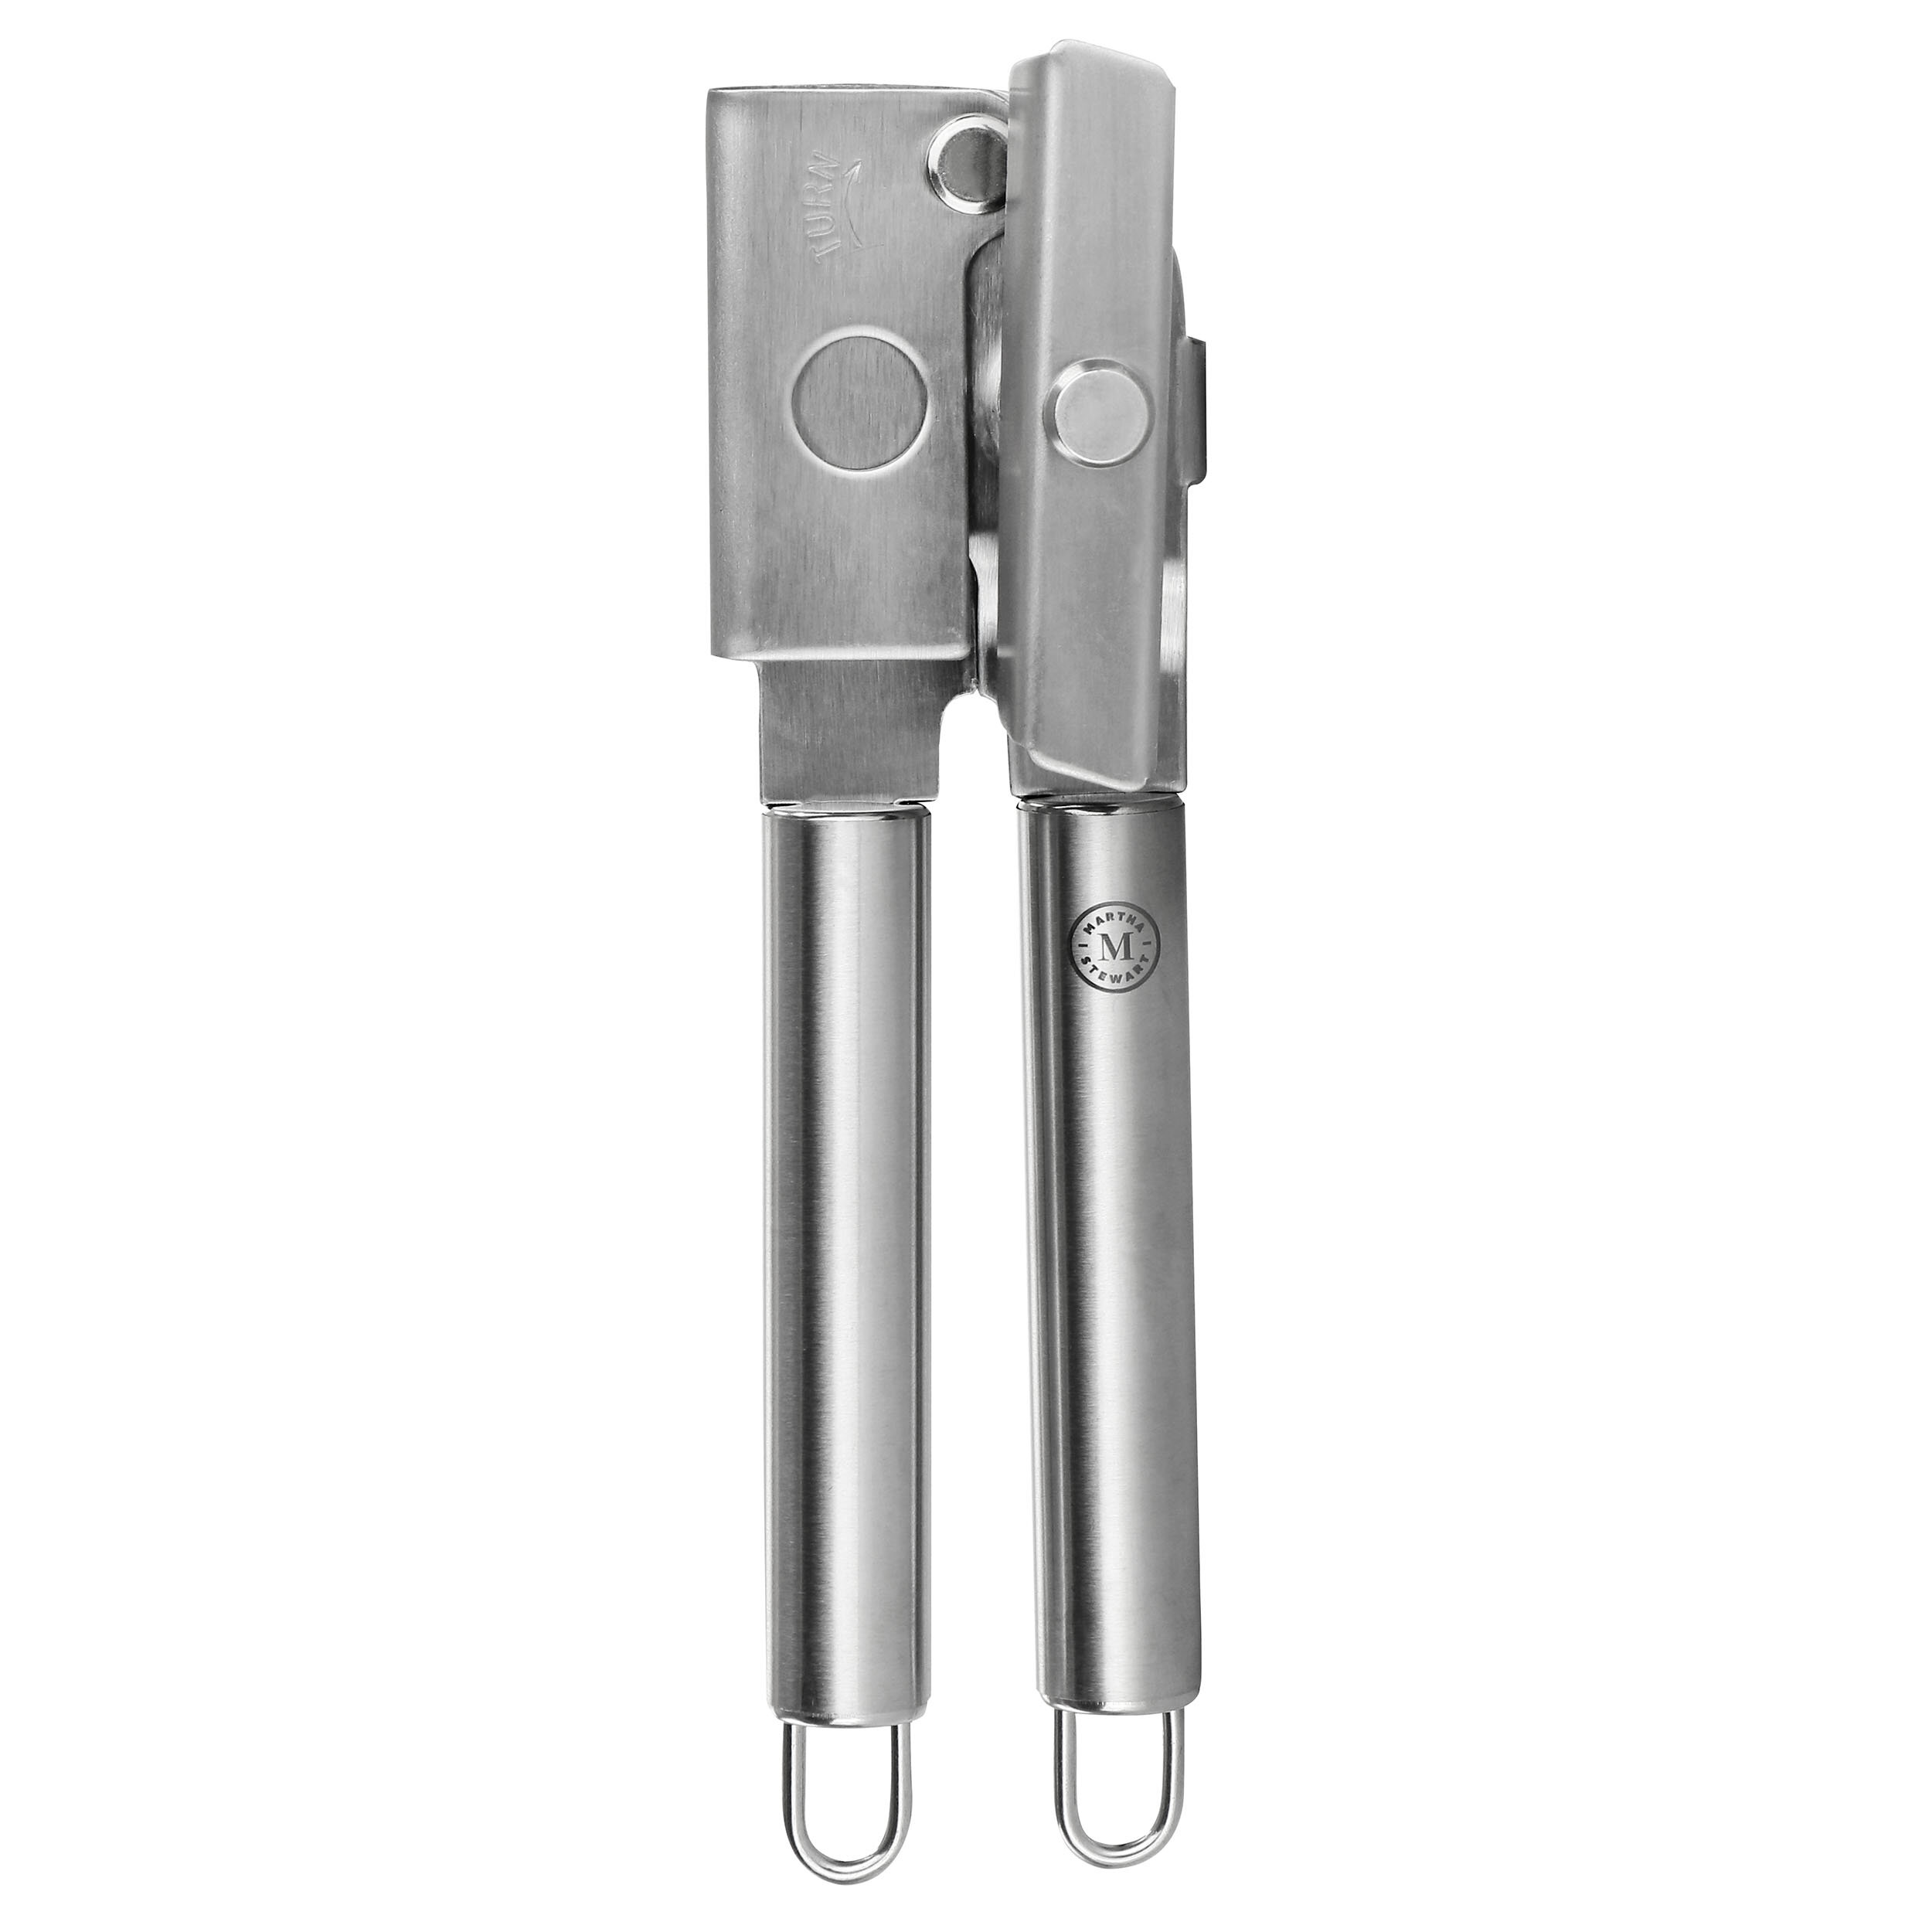 Zulay Kitchen Soft Edge Can Opener With Stainless Steel Blades and Large  Turn Knob, 1 - Food 4 Less